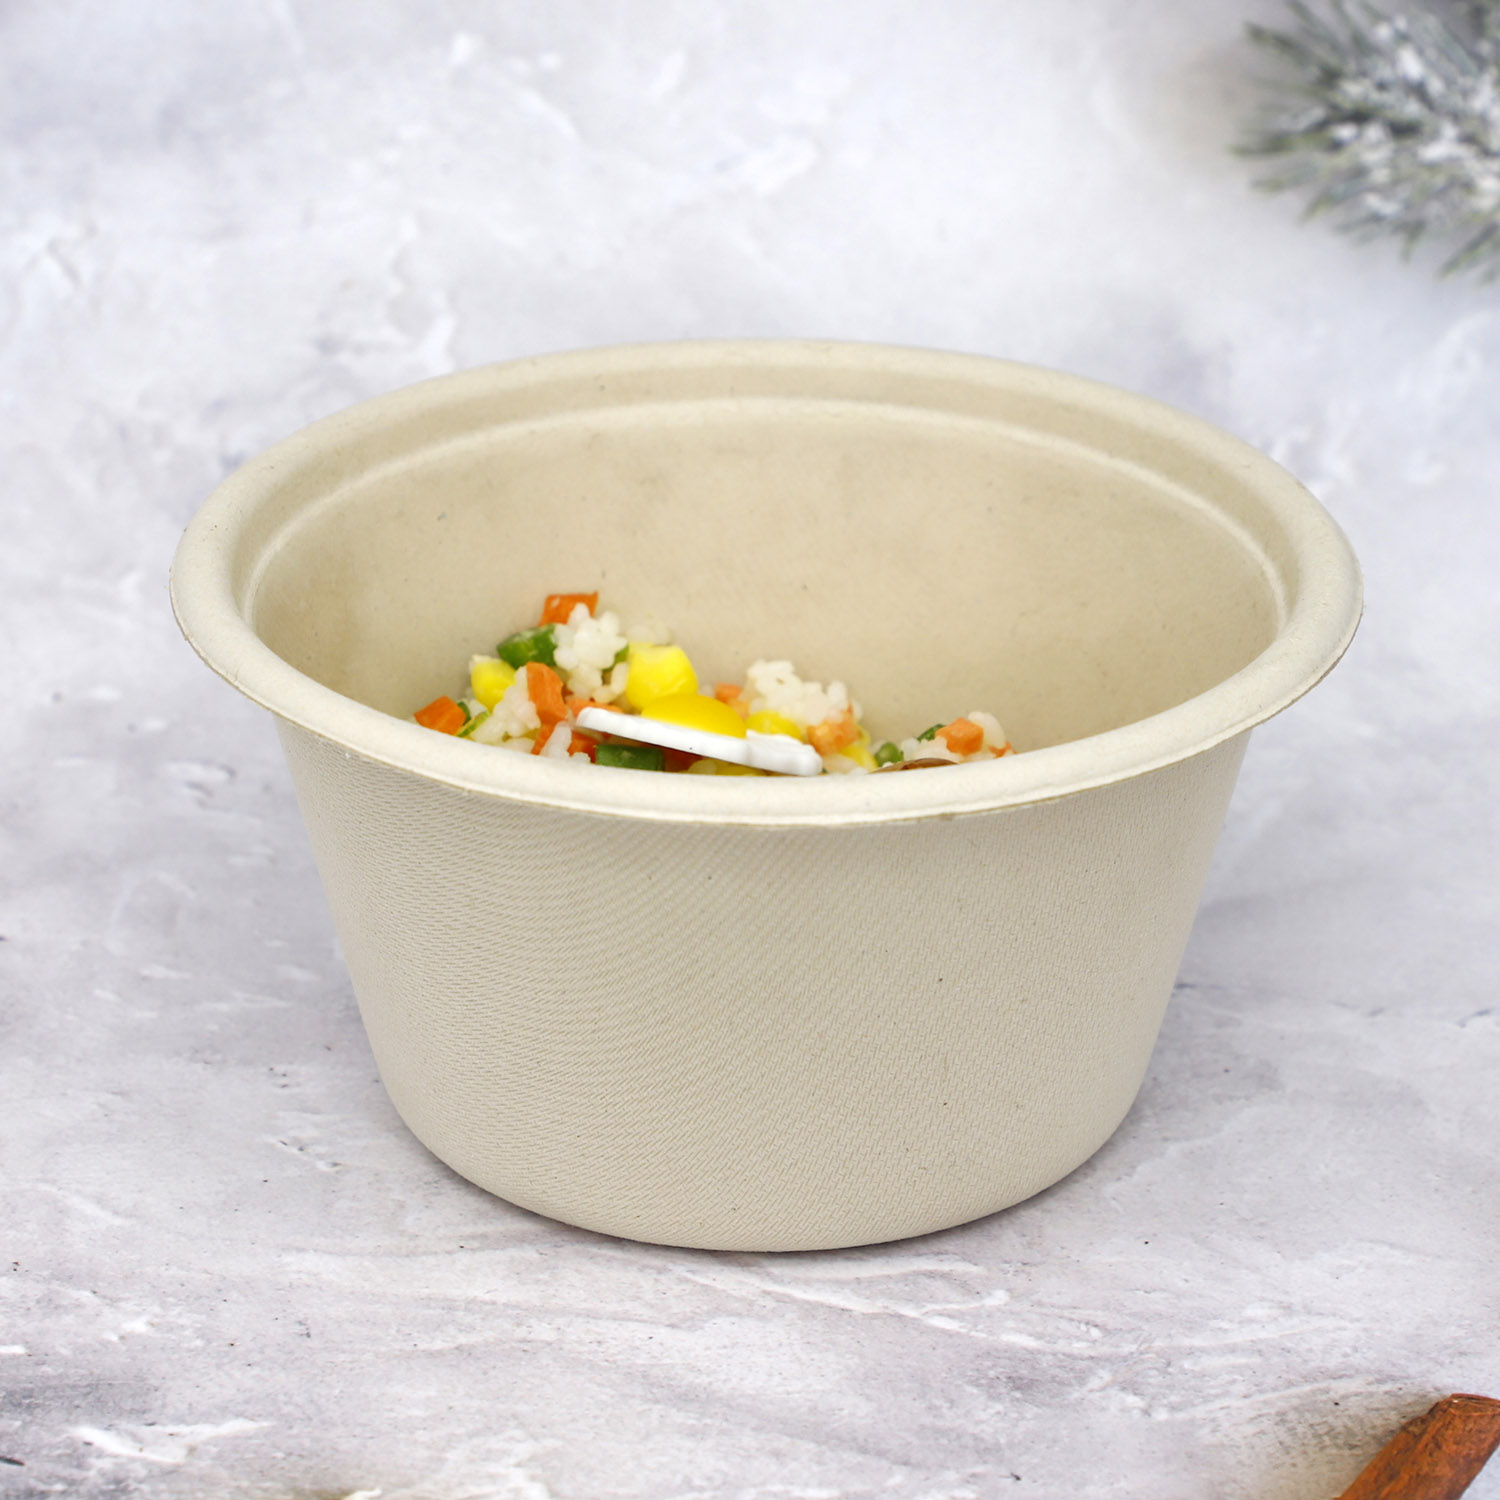 Eco-Friendly Sugarcane Bagasse Food Bowl Container with lid